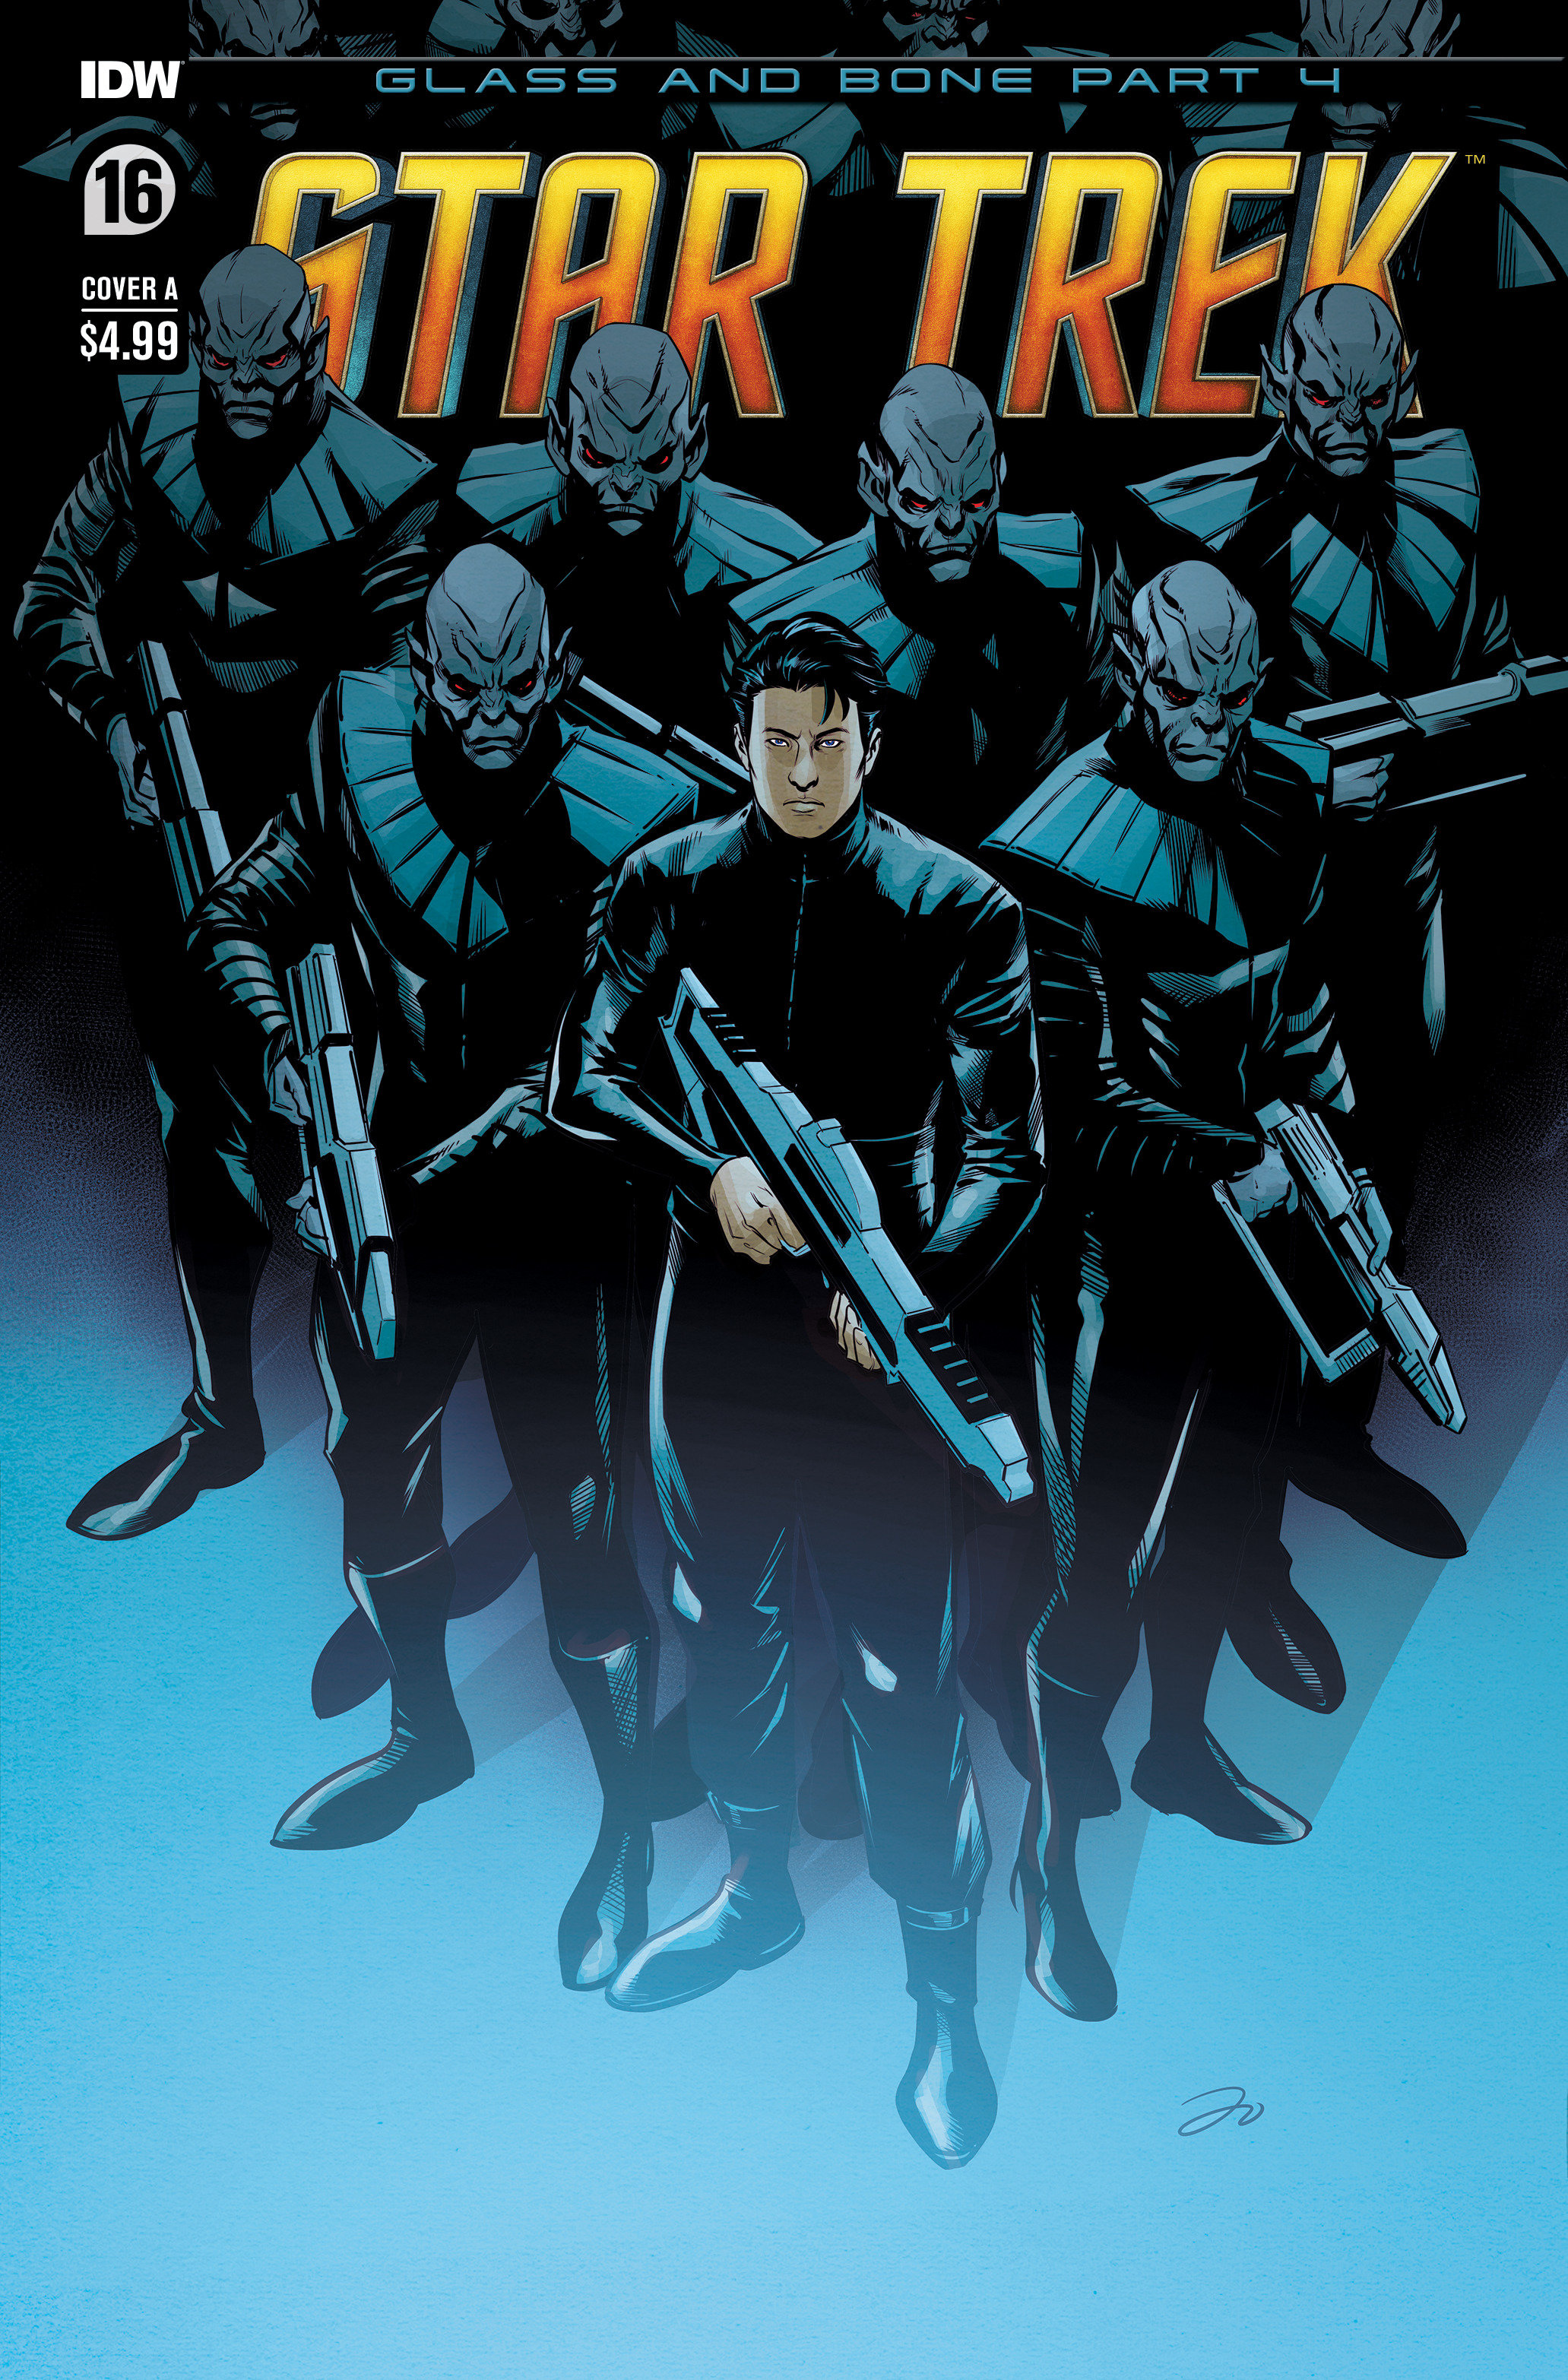 Star Trek #16 Cover A To